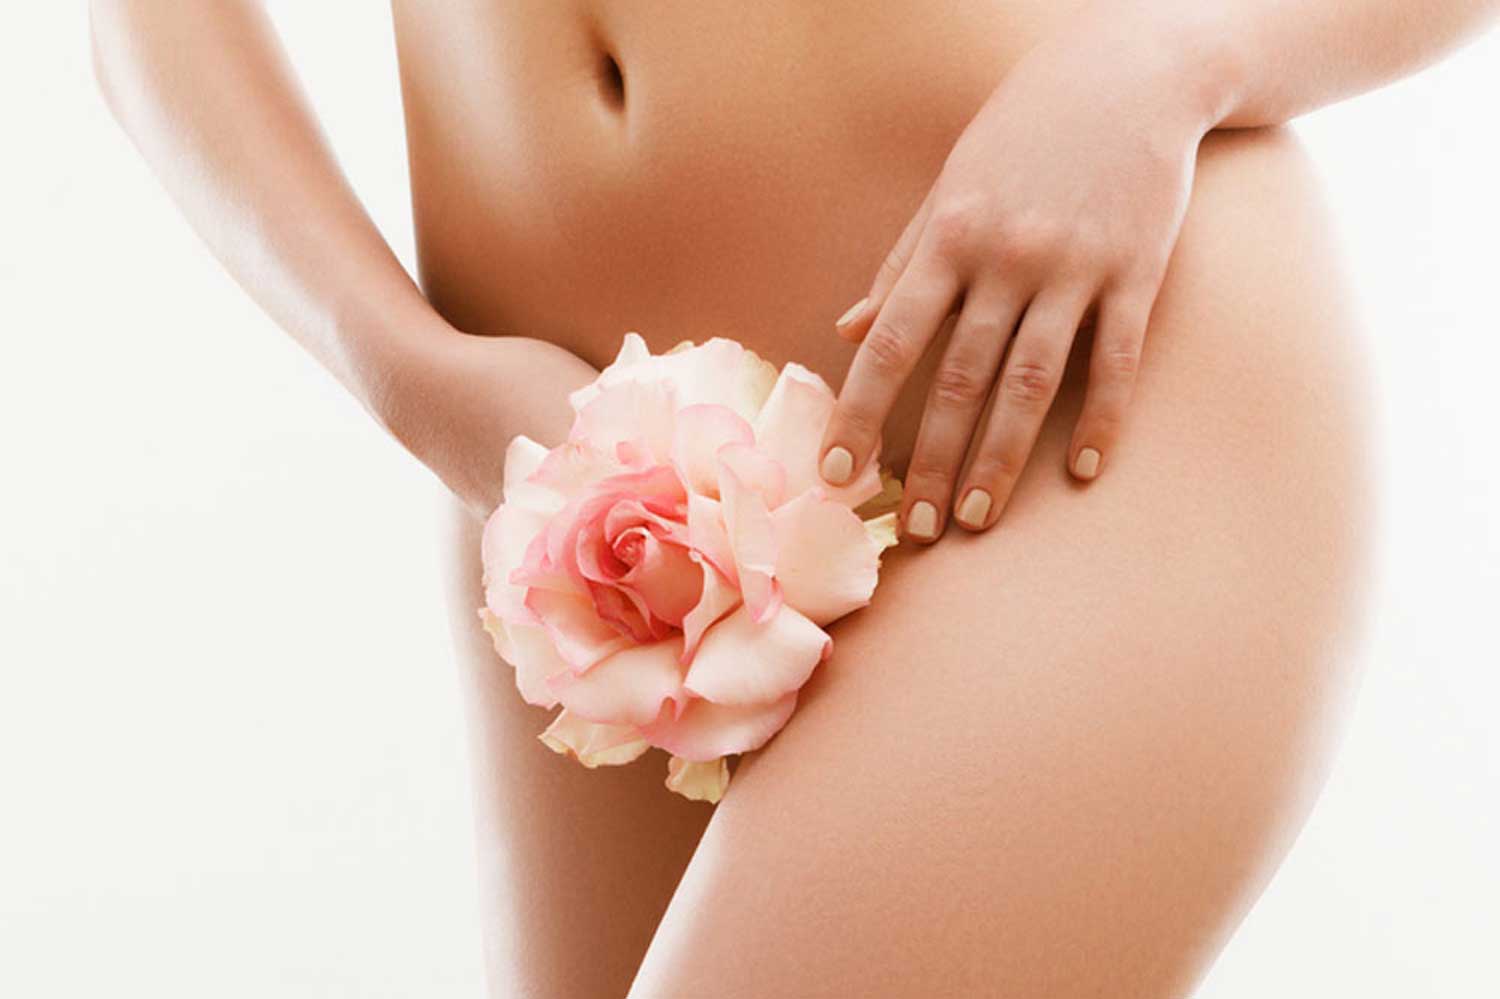 Vaginal Bleaching Guide: Should You Try It?